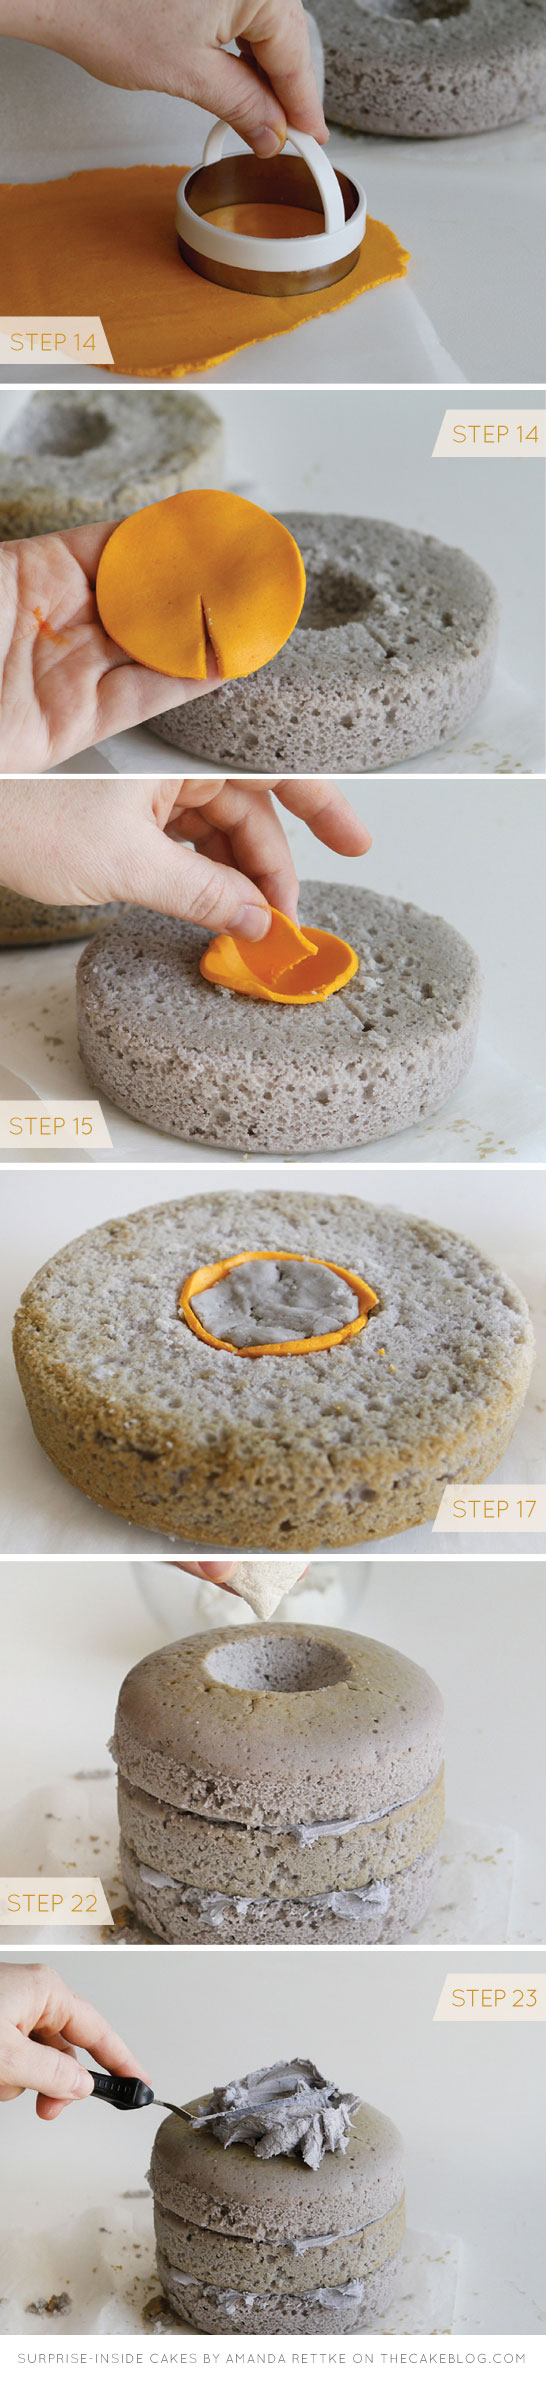 Learn  to make this Surprise-Inside Engagement Ring Cake | by Amanda Rettke, author of Surprise-Inside Cakes | on TheCakeBlog.com